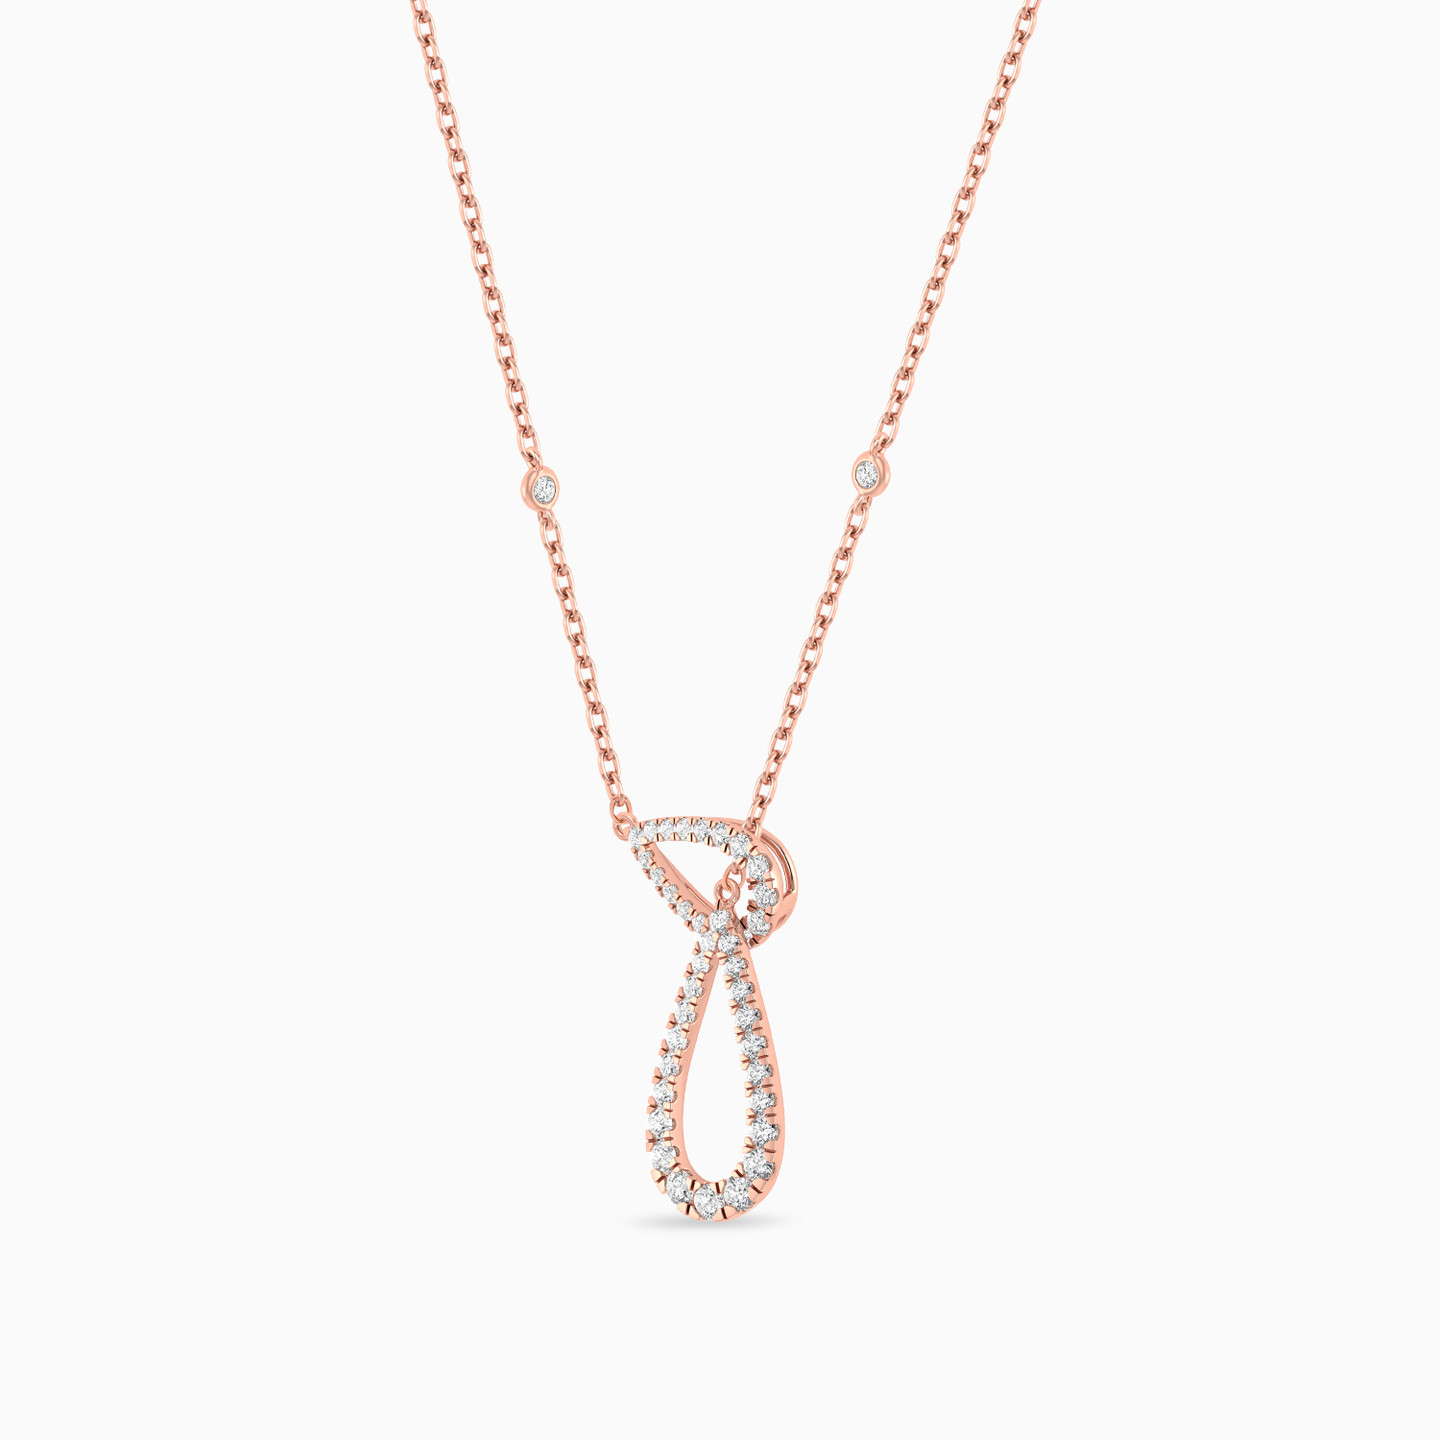 Pear Shaped Diamond Pendant with 18K Gold Chain - 2